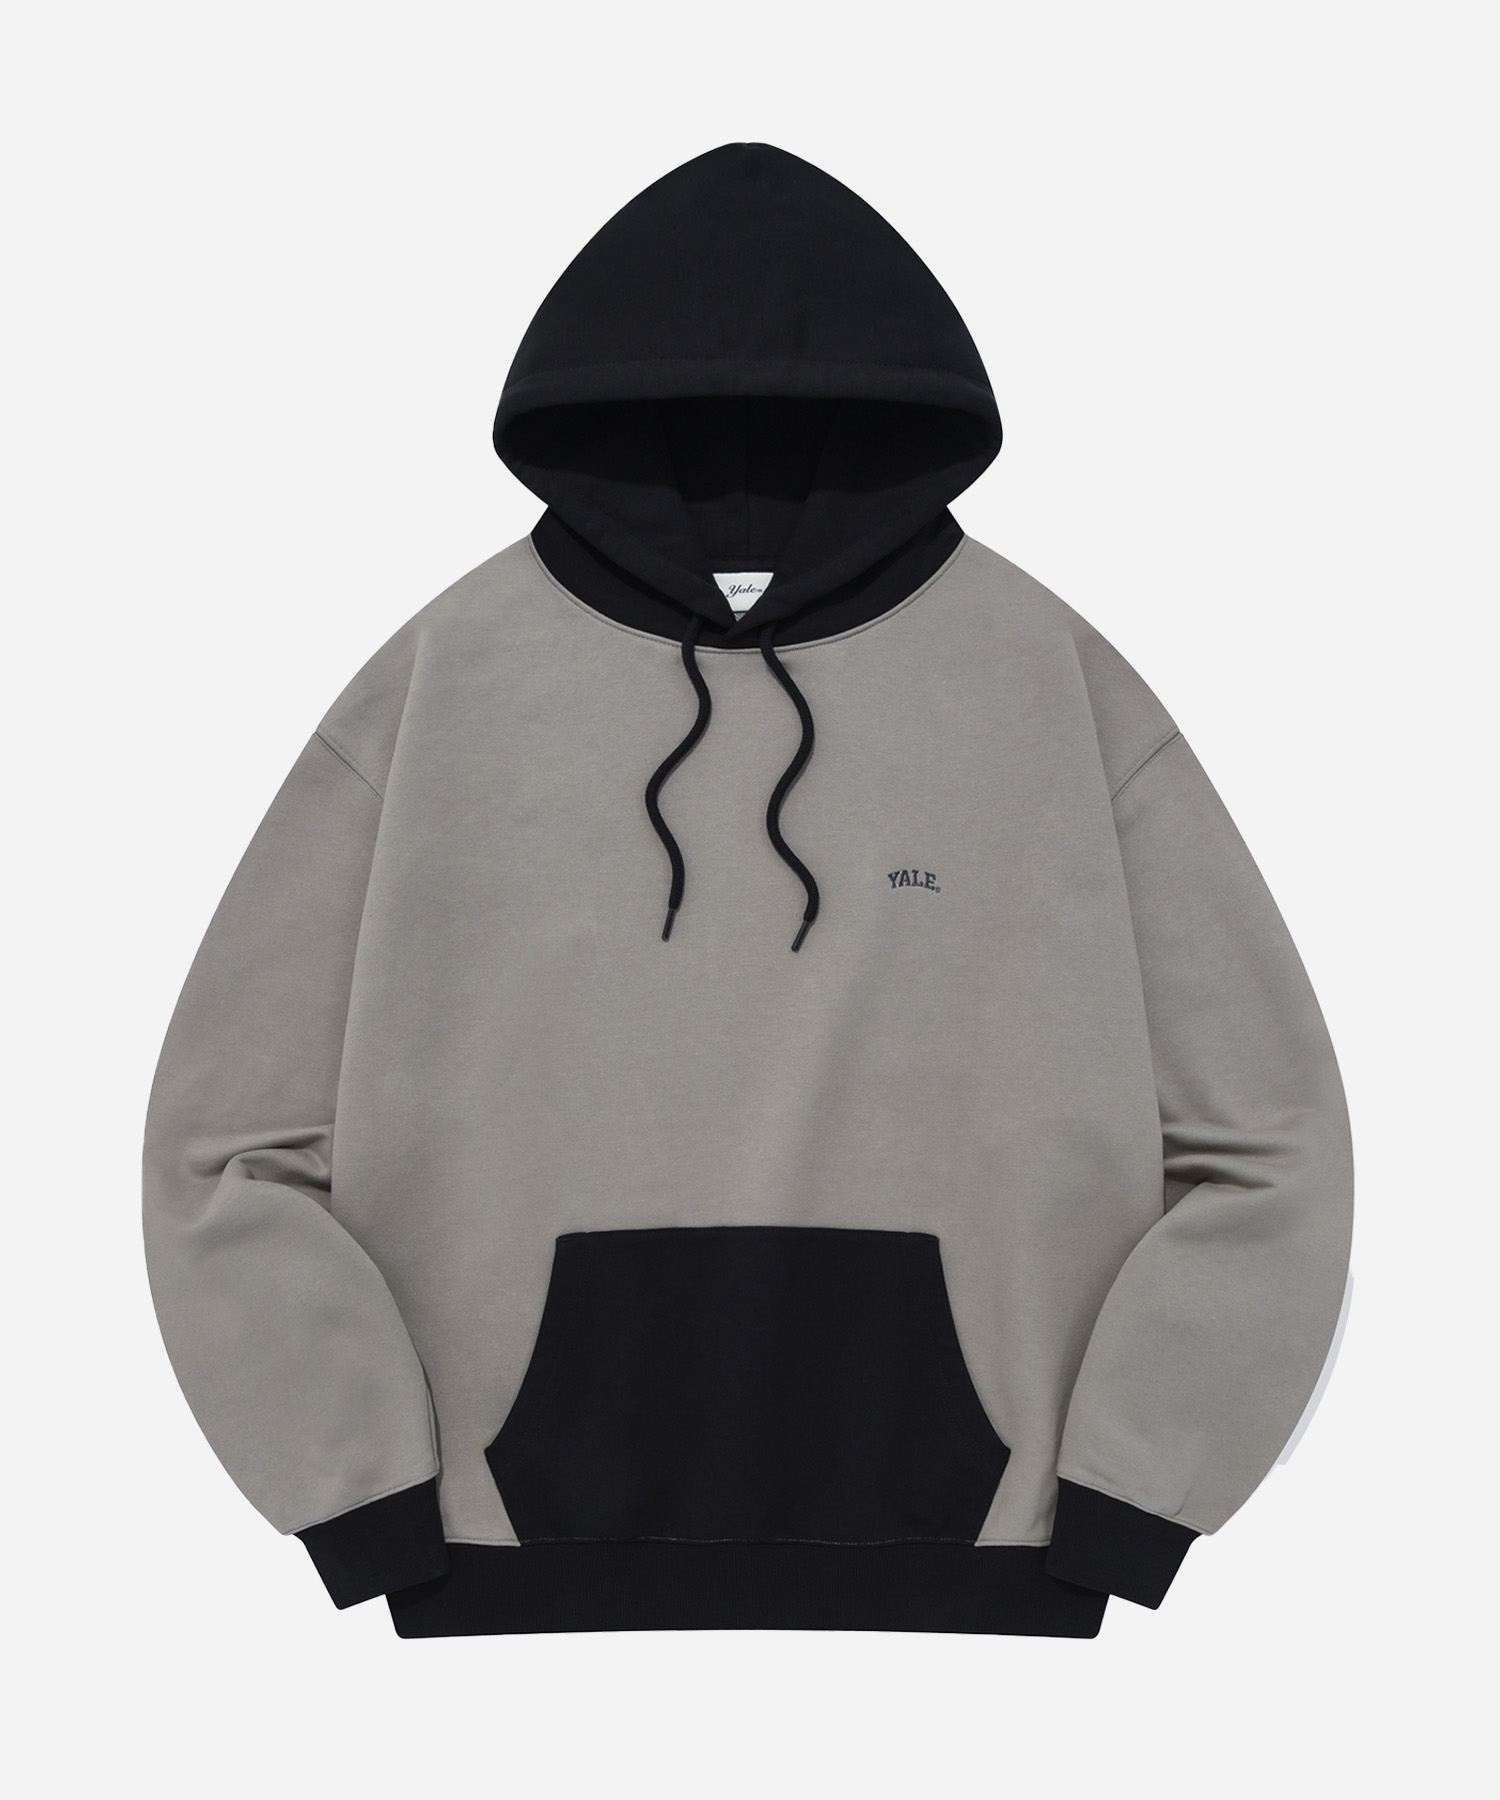 [ONEMILE WEAR] SMALL ARCH BASIC HOODIE GRAY / BLACK